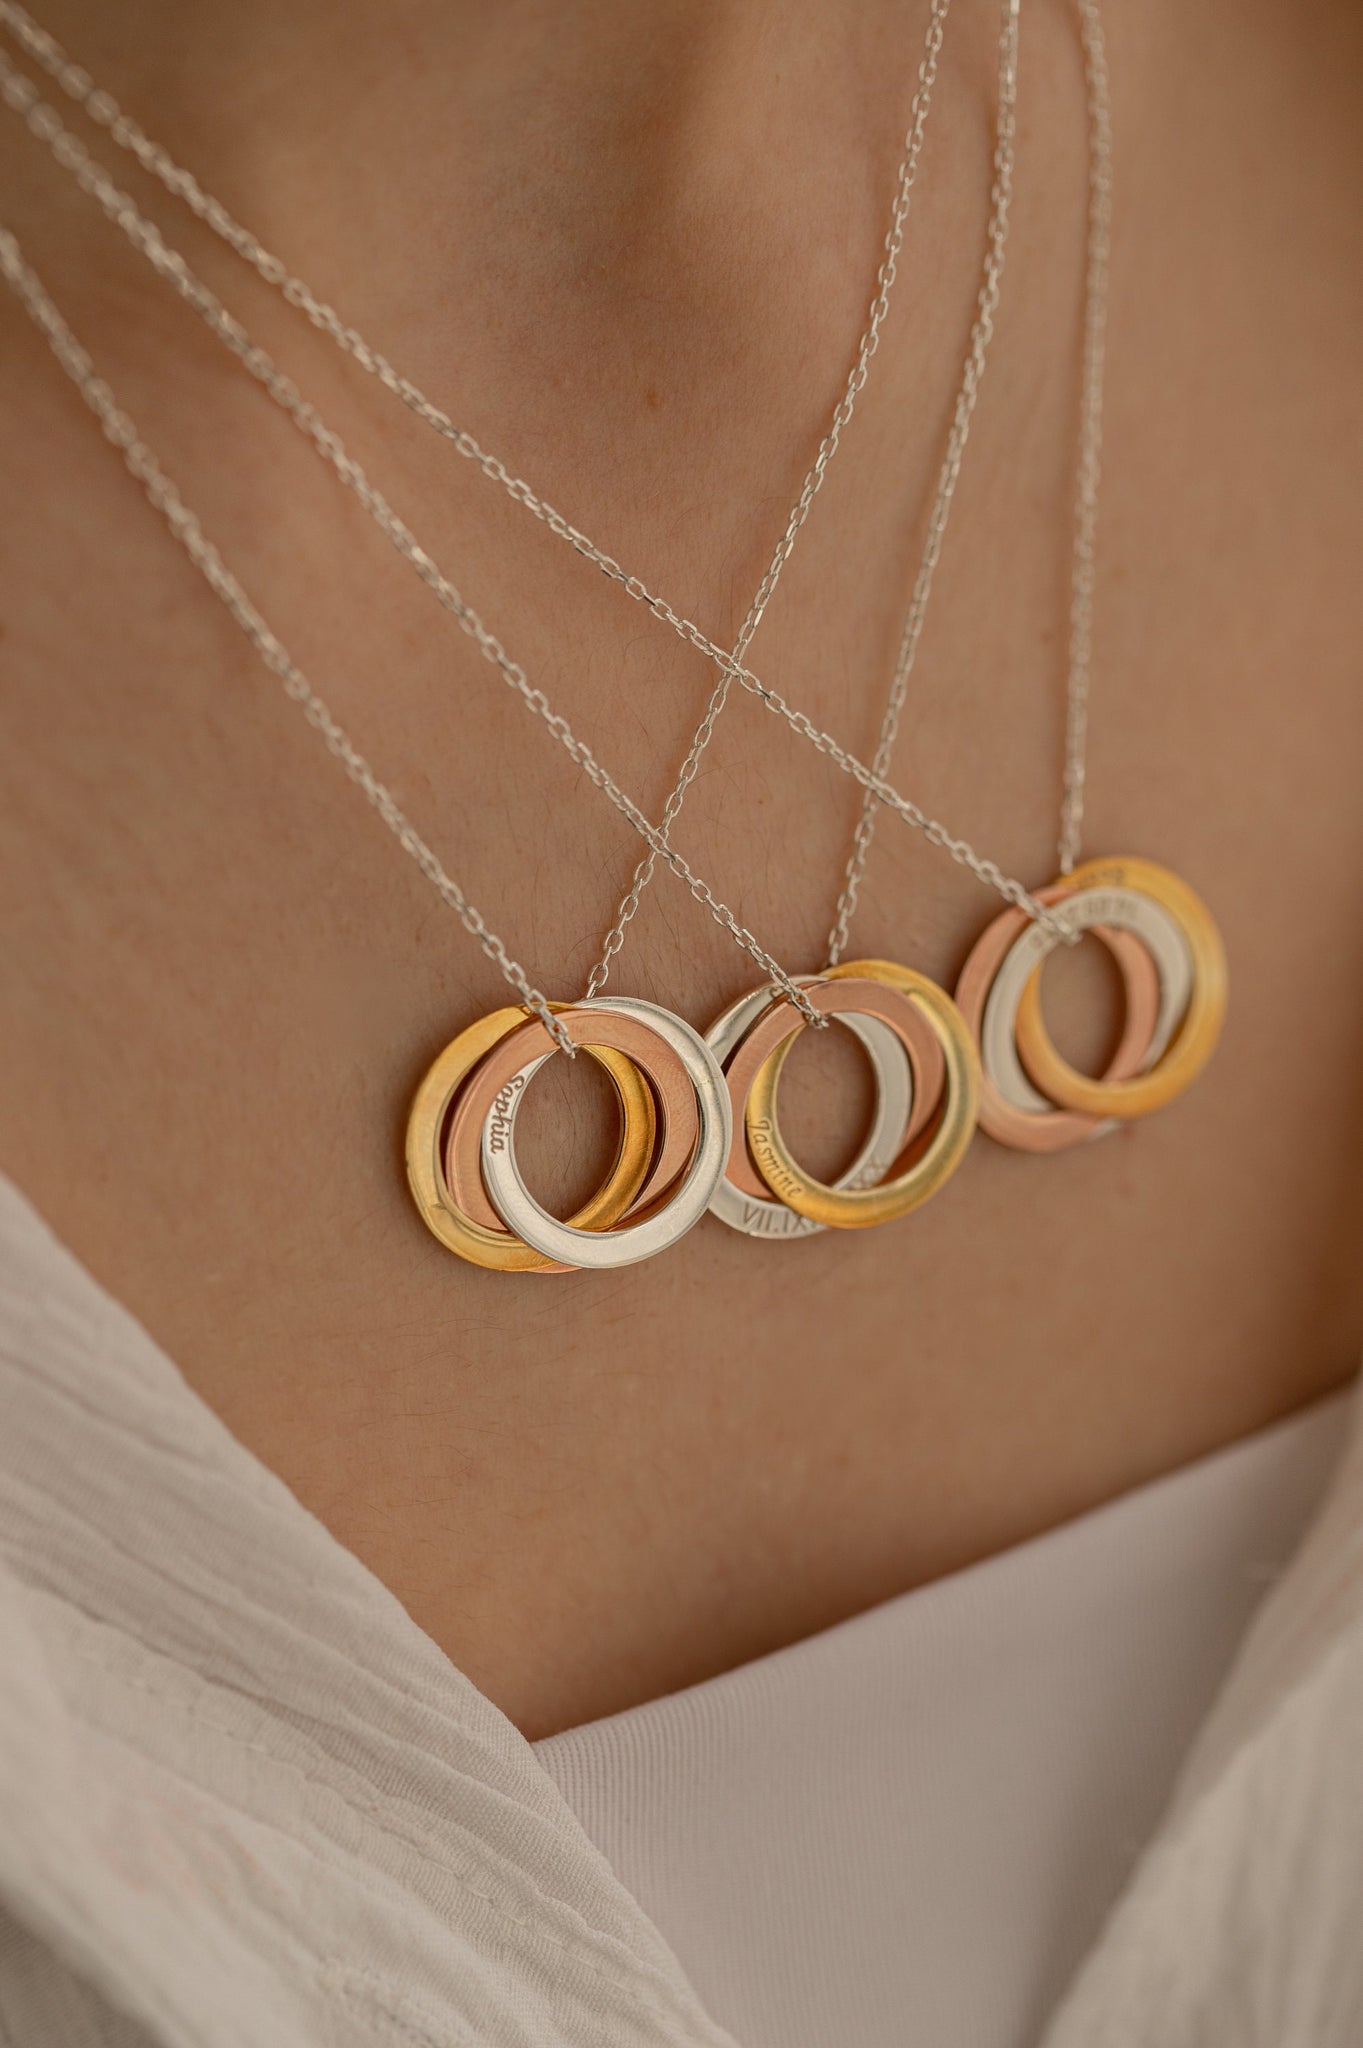 Personalized Multiple Ring Necklace, Mom Necklace, Custom Name Necklace, Mothers Day Gift, Interlocking Circle Necklace, Minimalist Necklace